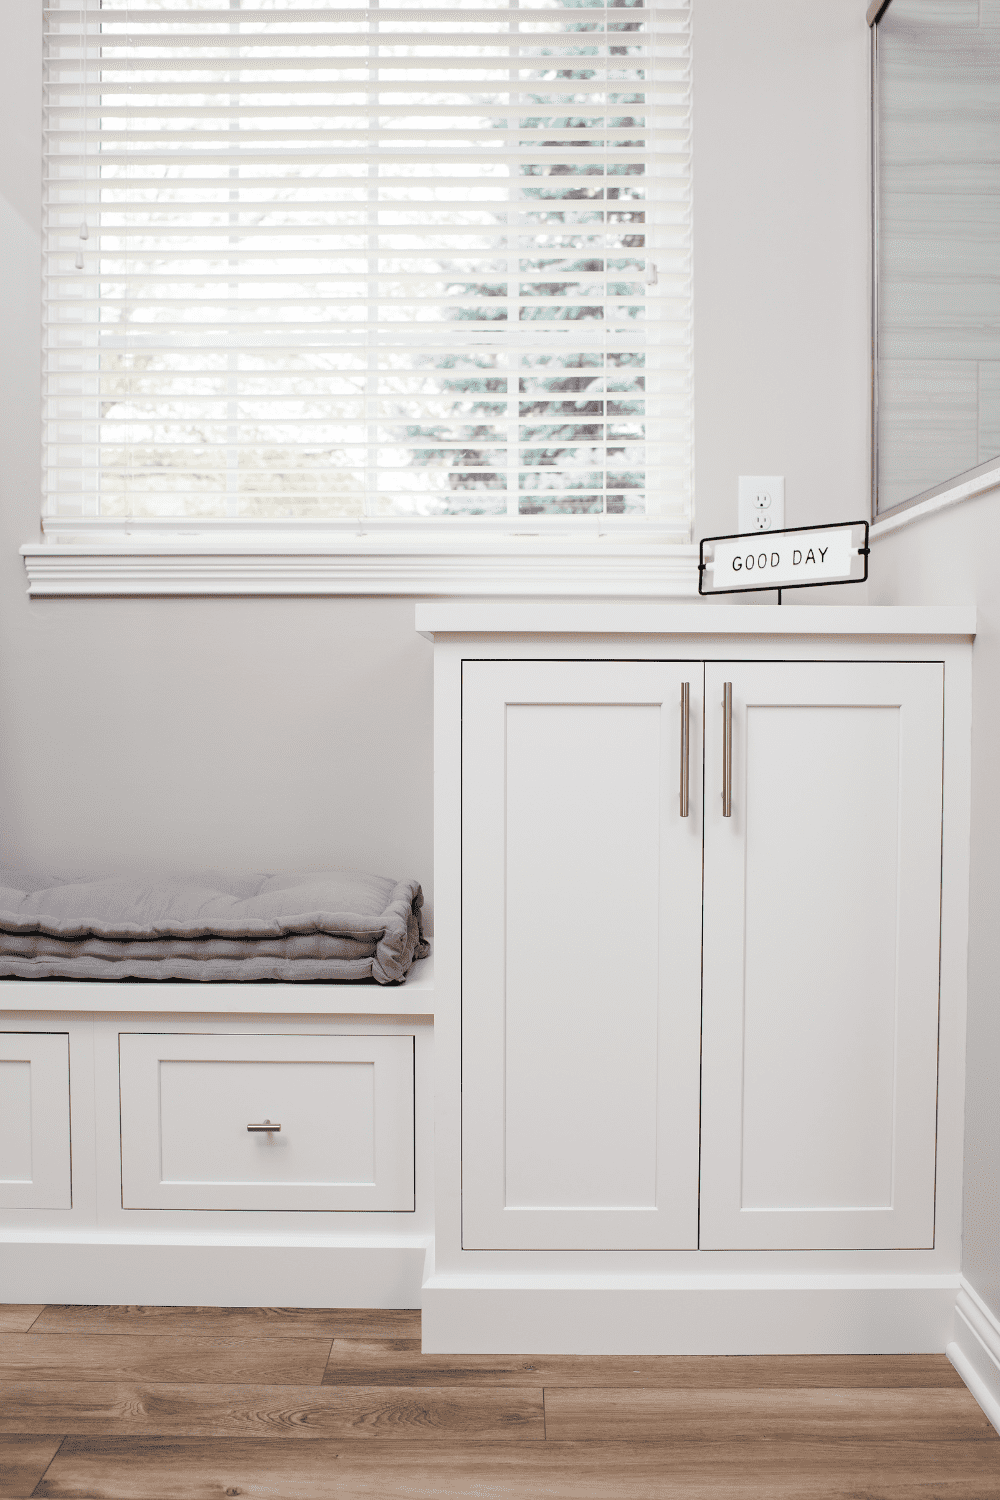 Nicholas Design Build | A refreshing bathroom remodel featuring a white color scheme, complete with a comfortable bench and an ample window that fills the space with natural light.